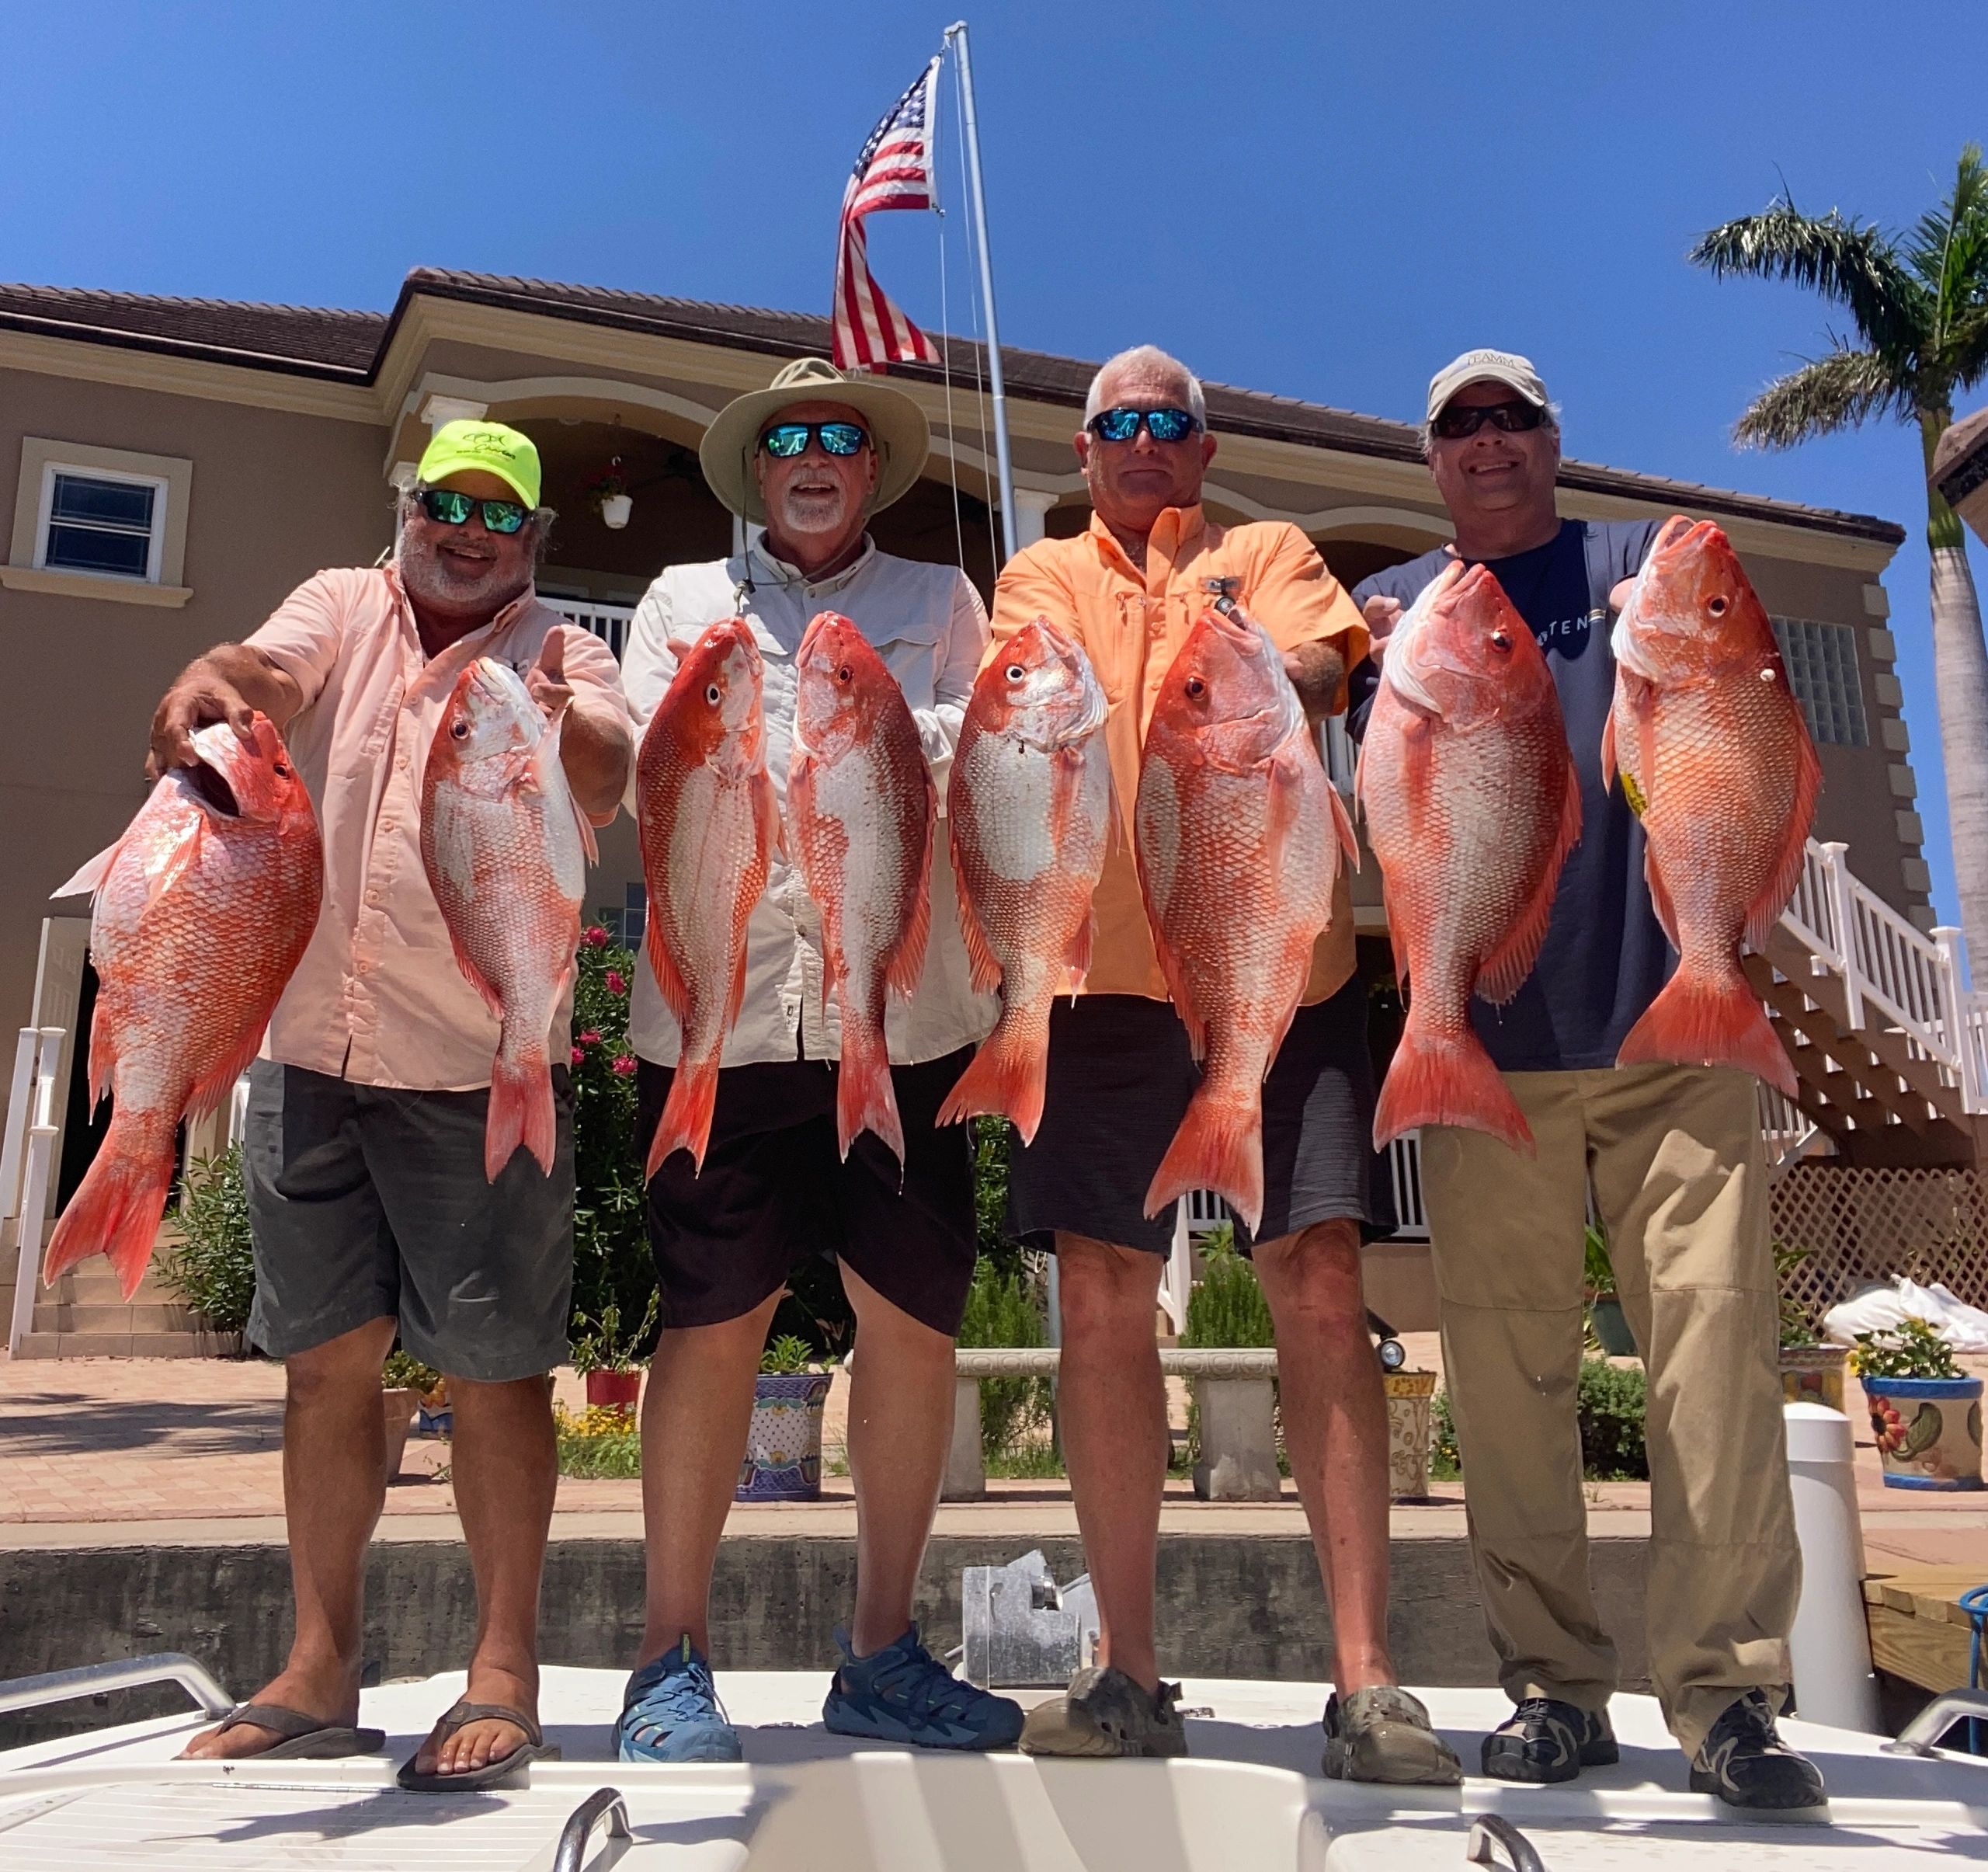 Guided Offshore and Deep Sea Fishing Trips - Epic Charters Unlimited